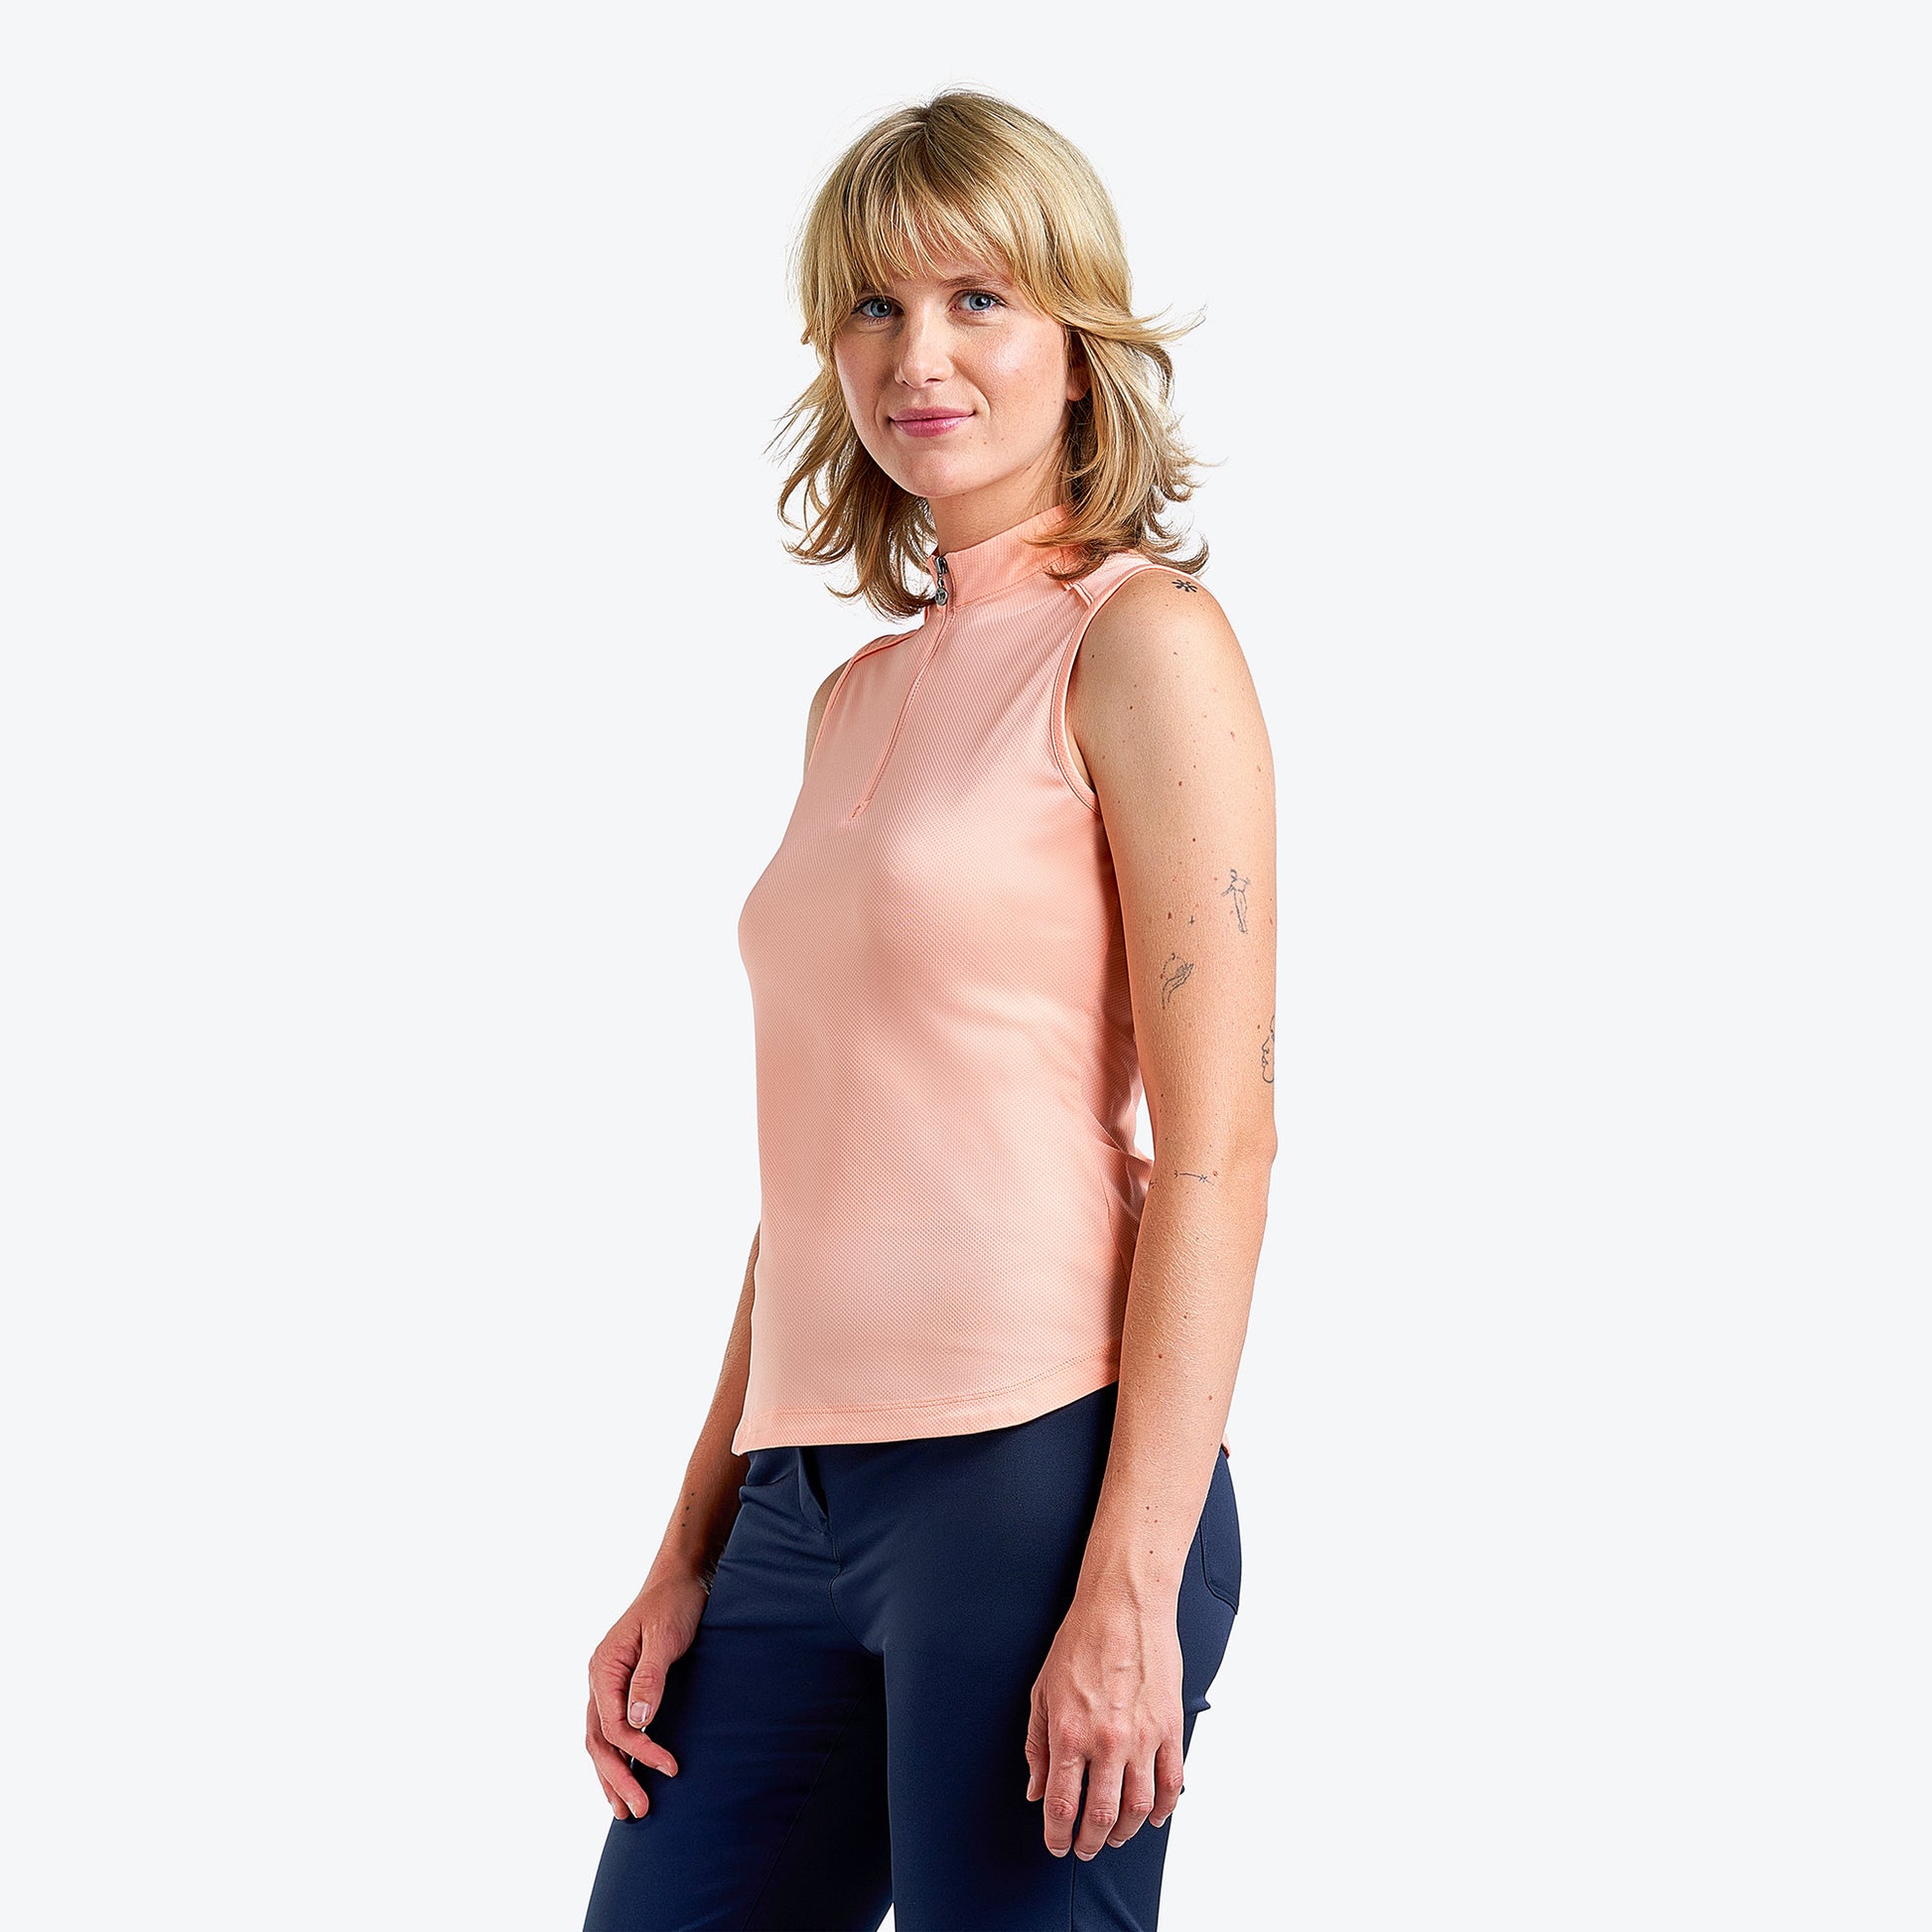 Nivo Ladies Sleeveless Polo with UPF50 in Coral Reef